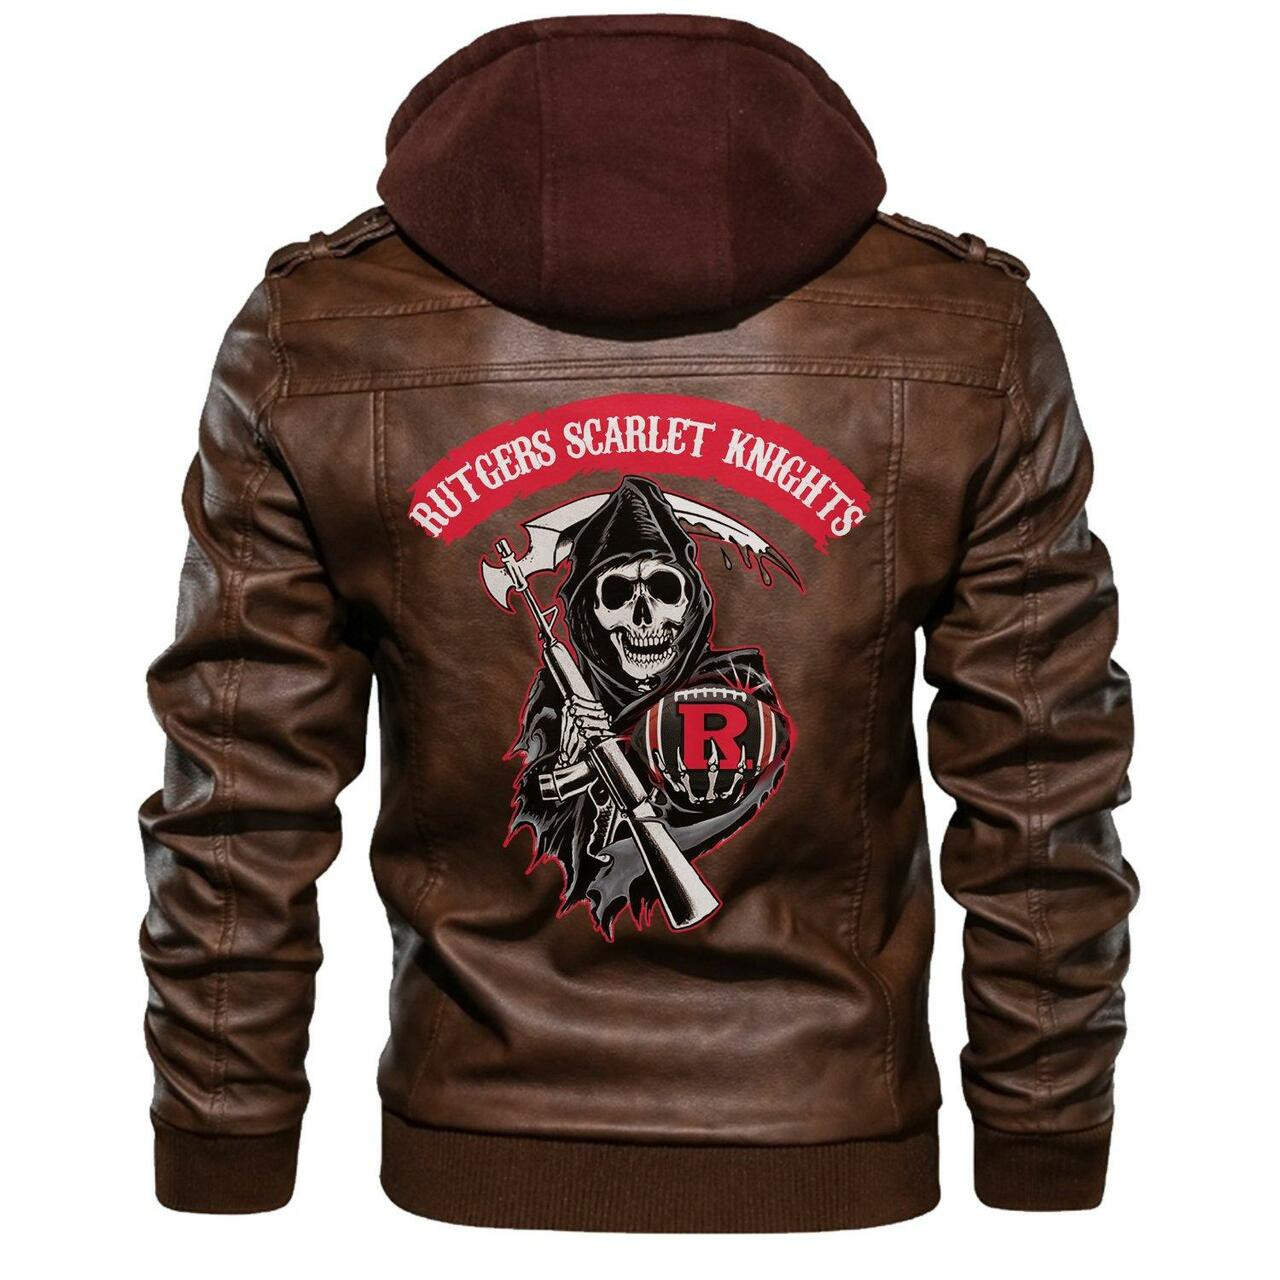 Check out and find the right leather jacket below 137